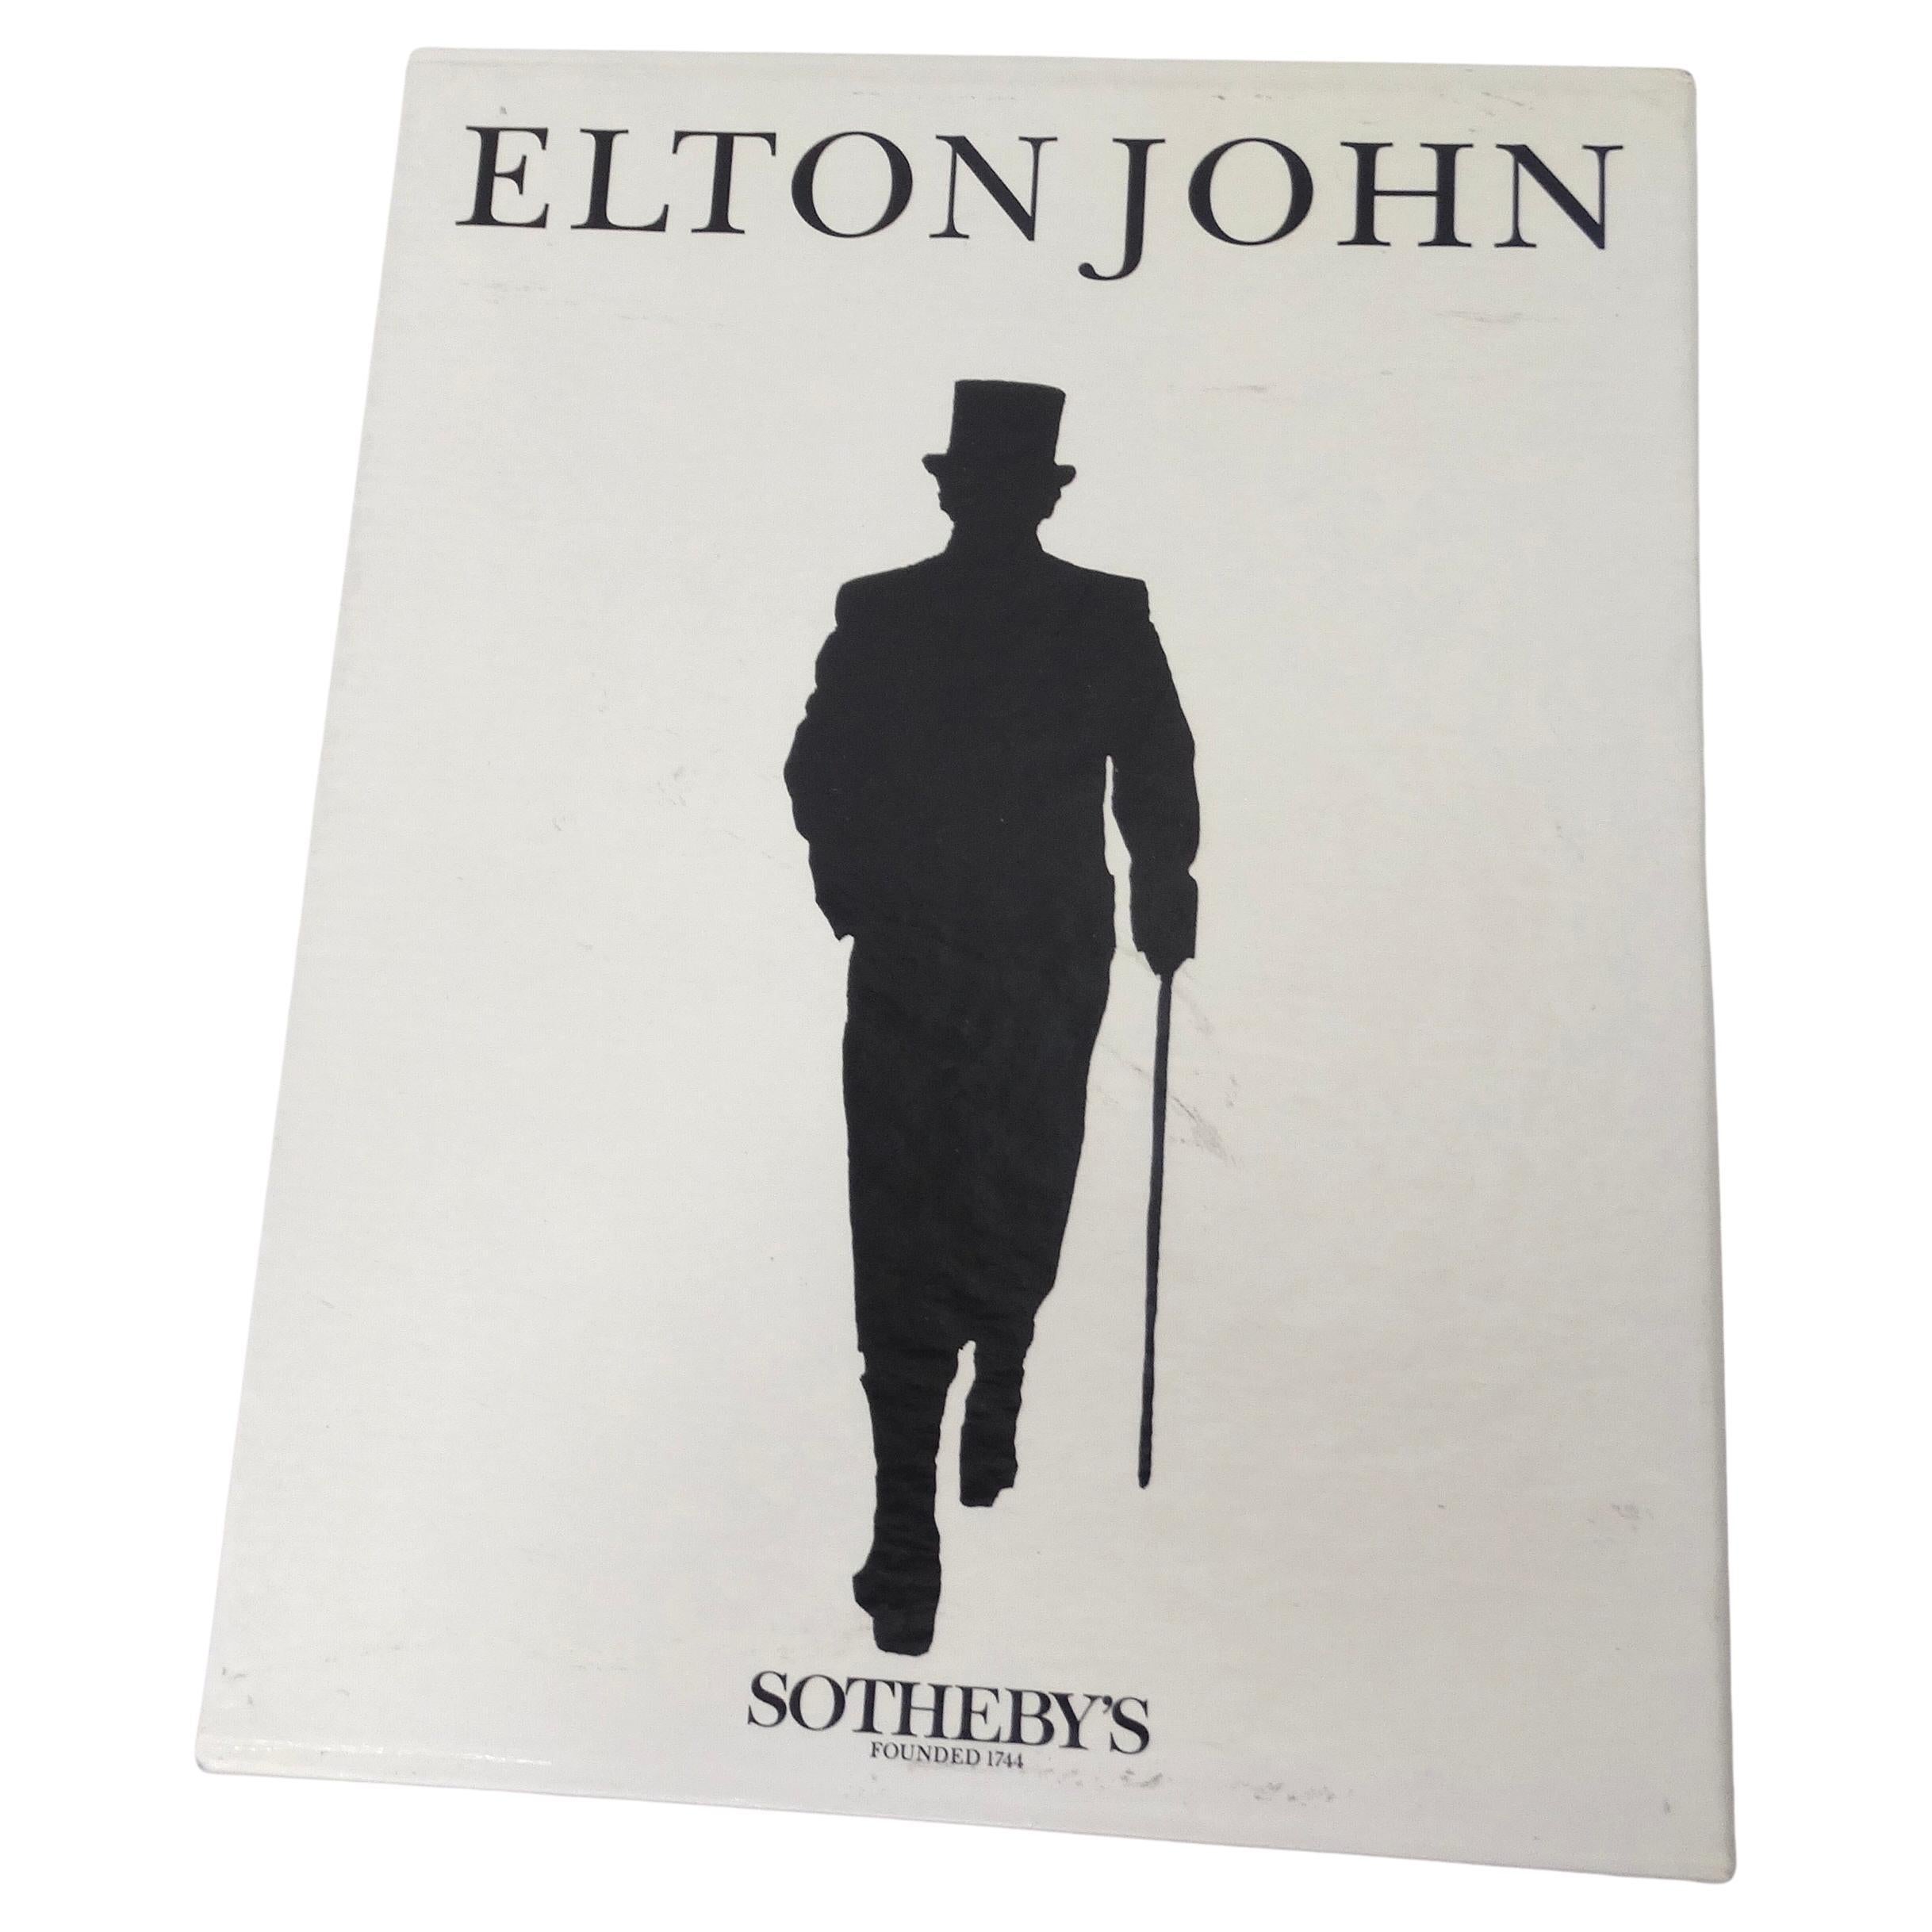 Fashion and music collide in this rare 1988 Sotheby’s Elton John book collection! Dive in to the fashion history of rock legend Elton John with this amazing collection of books that go into detail on the singers costumes, jewelry, hats and objects!